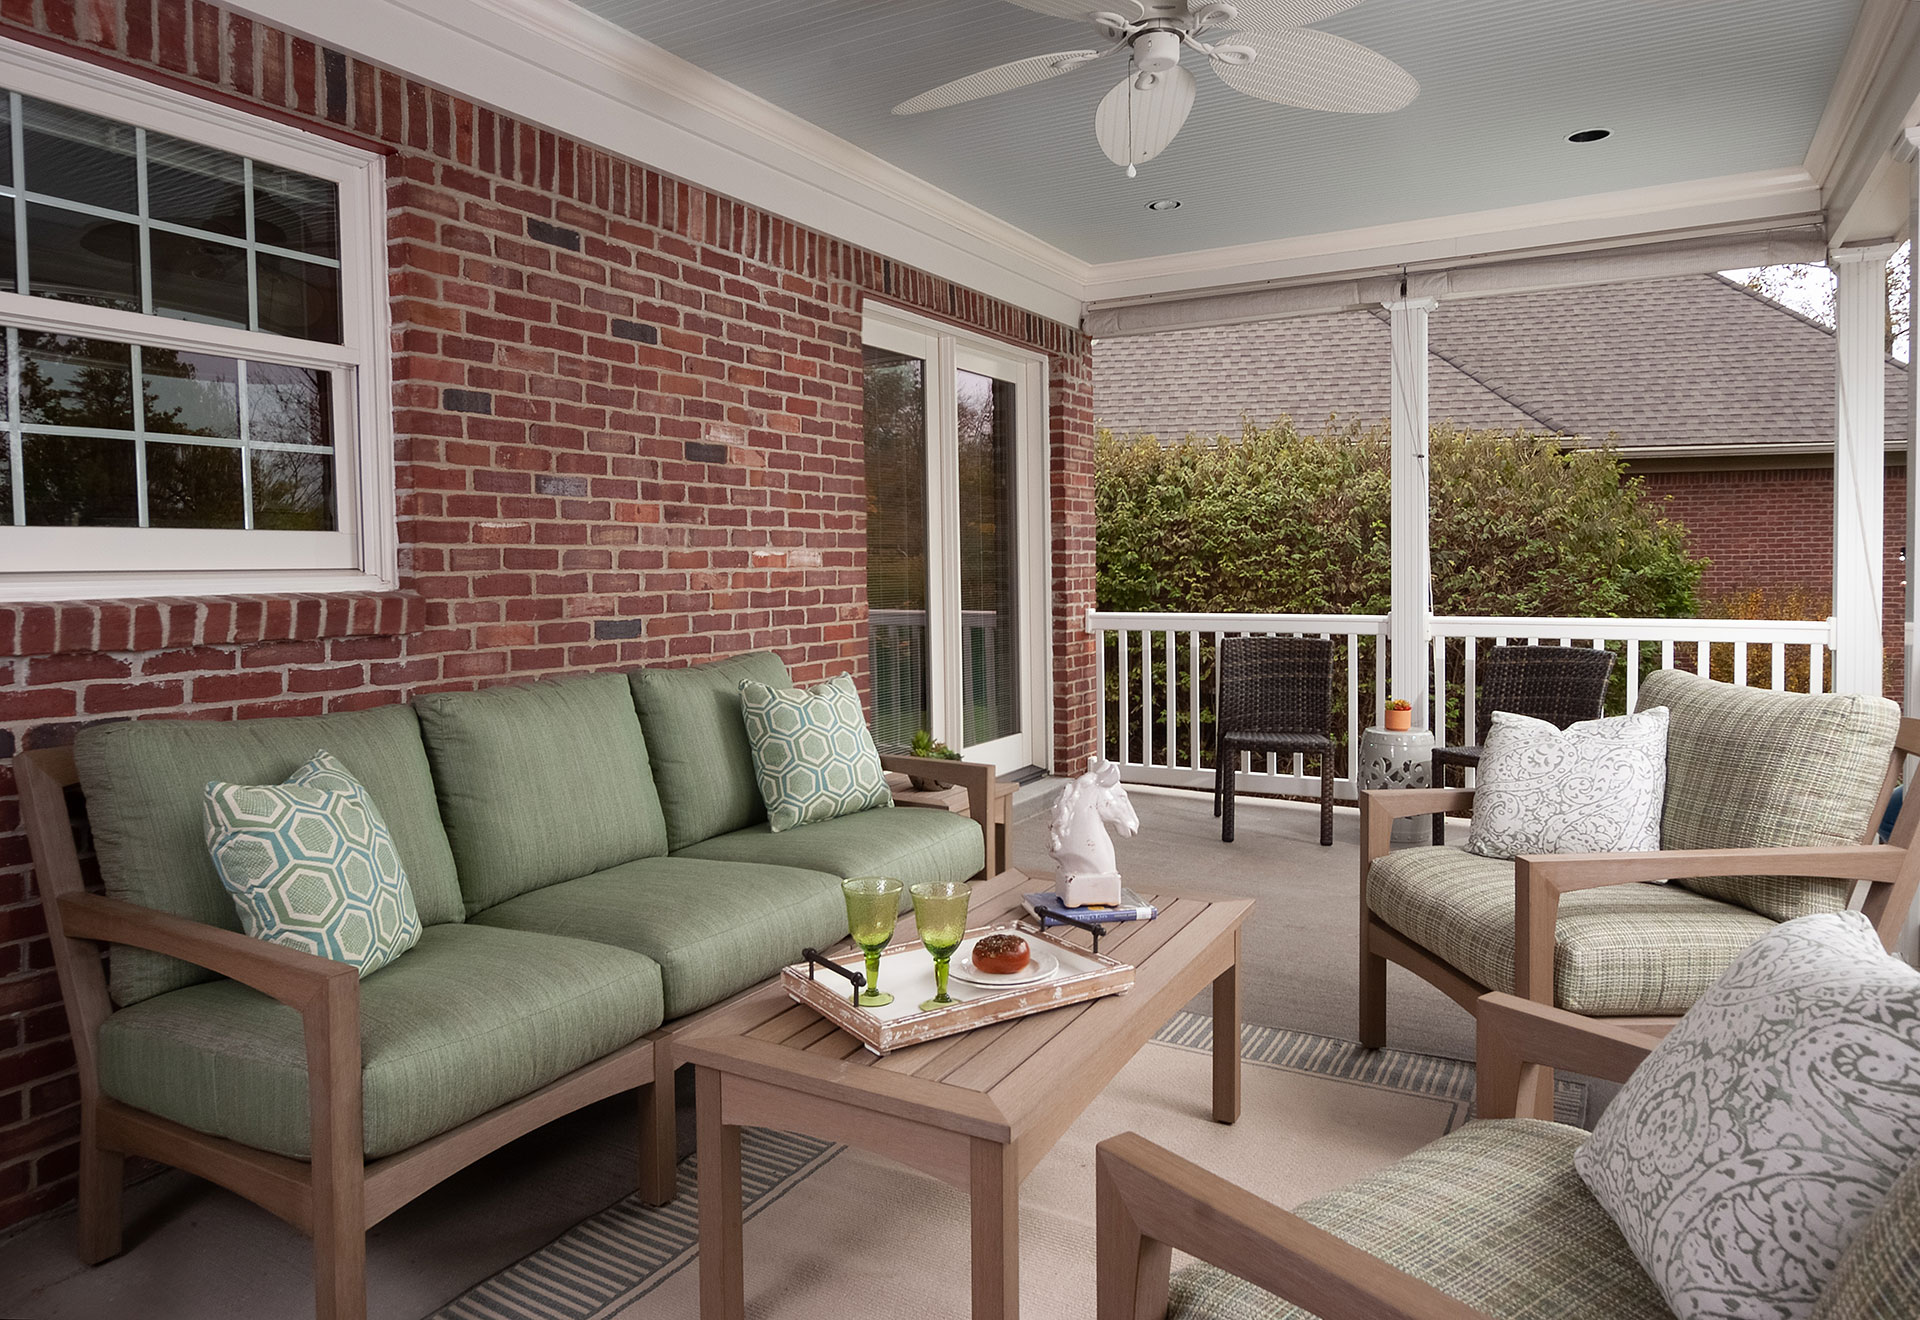 How to Prepare Your Porch for Spring